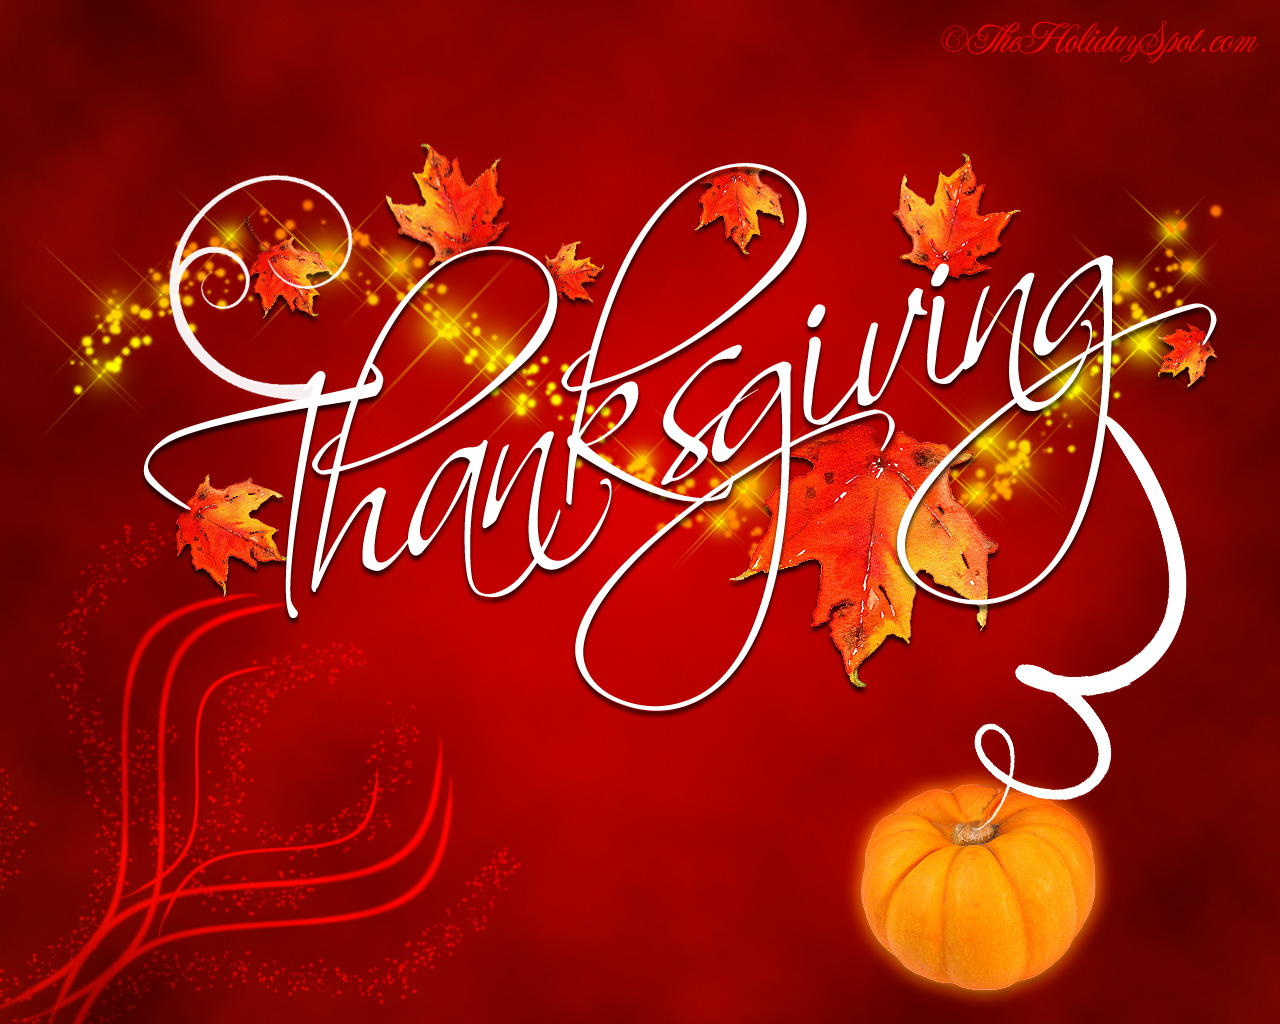 Hotel Reservation Happy Thanksgiving Day HD Wallpaper